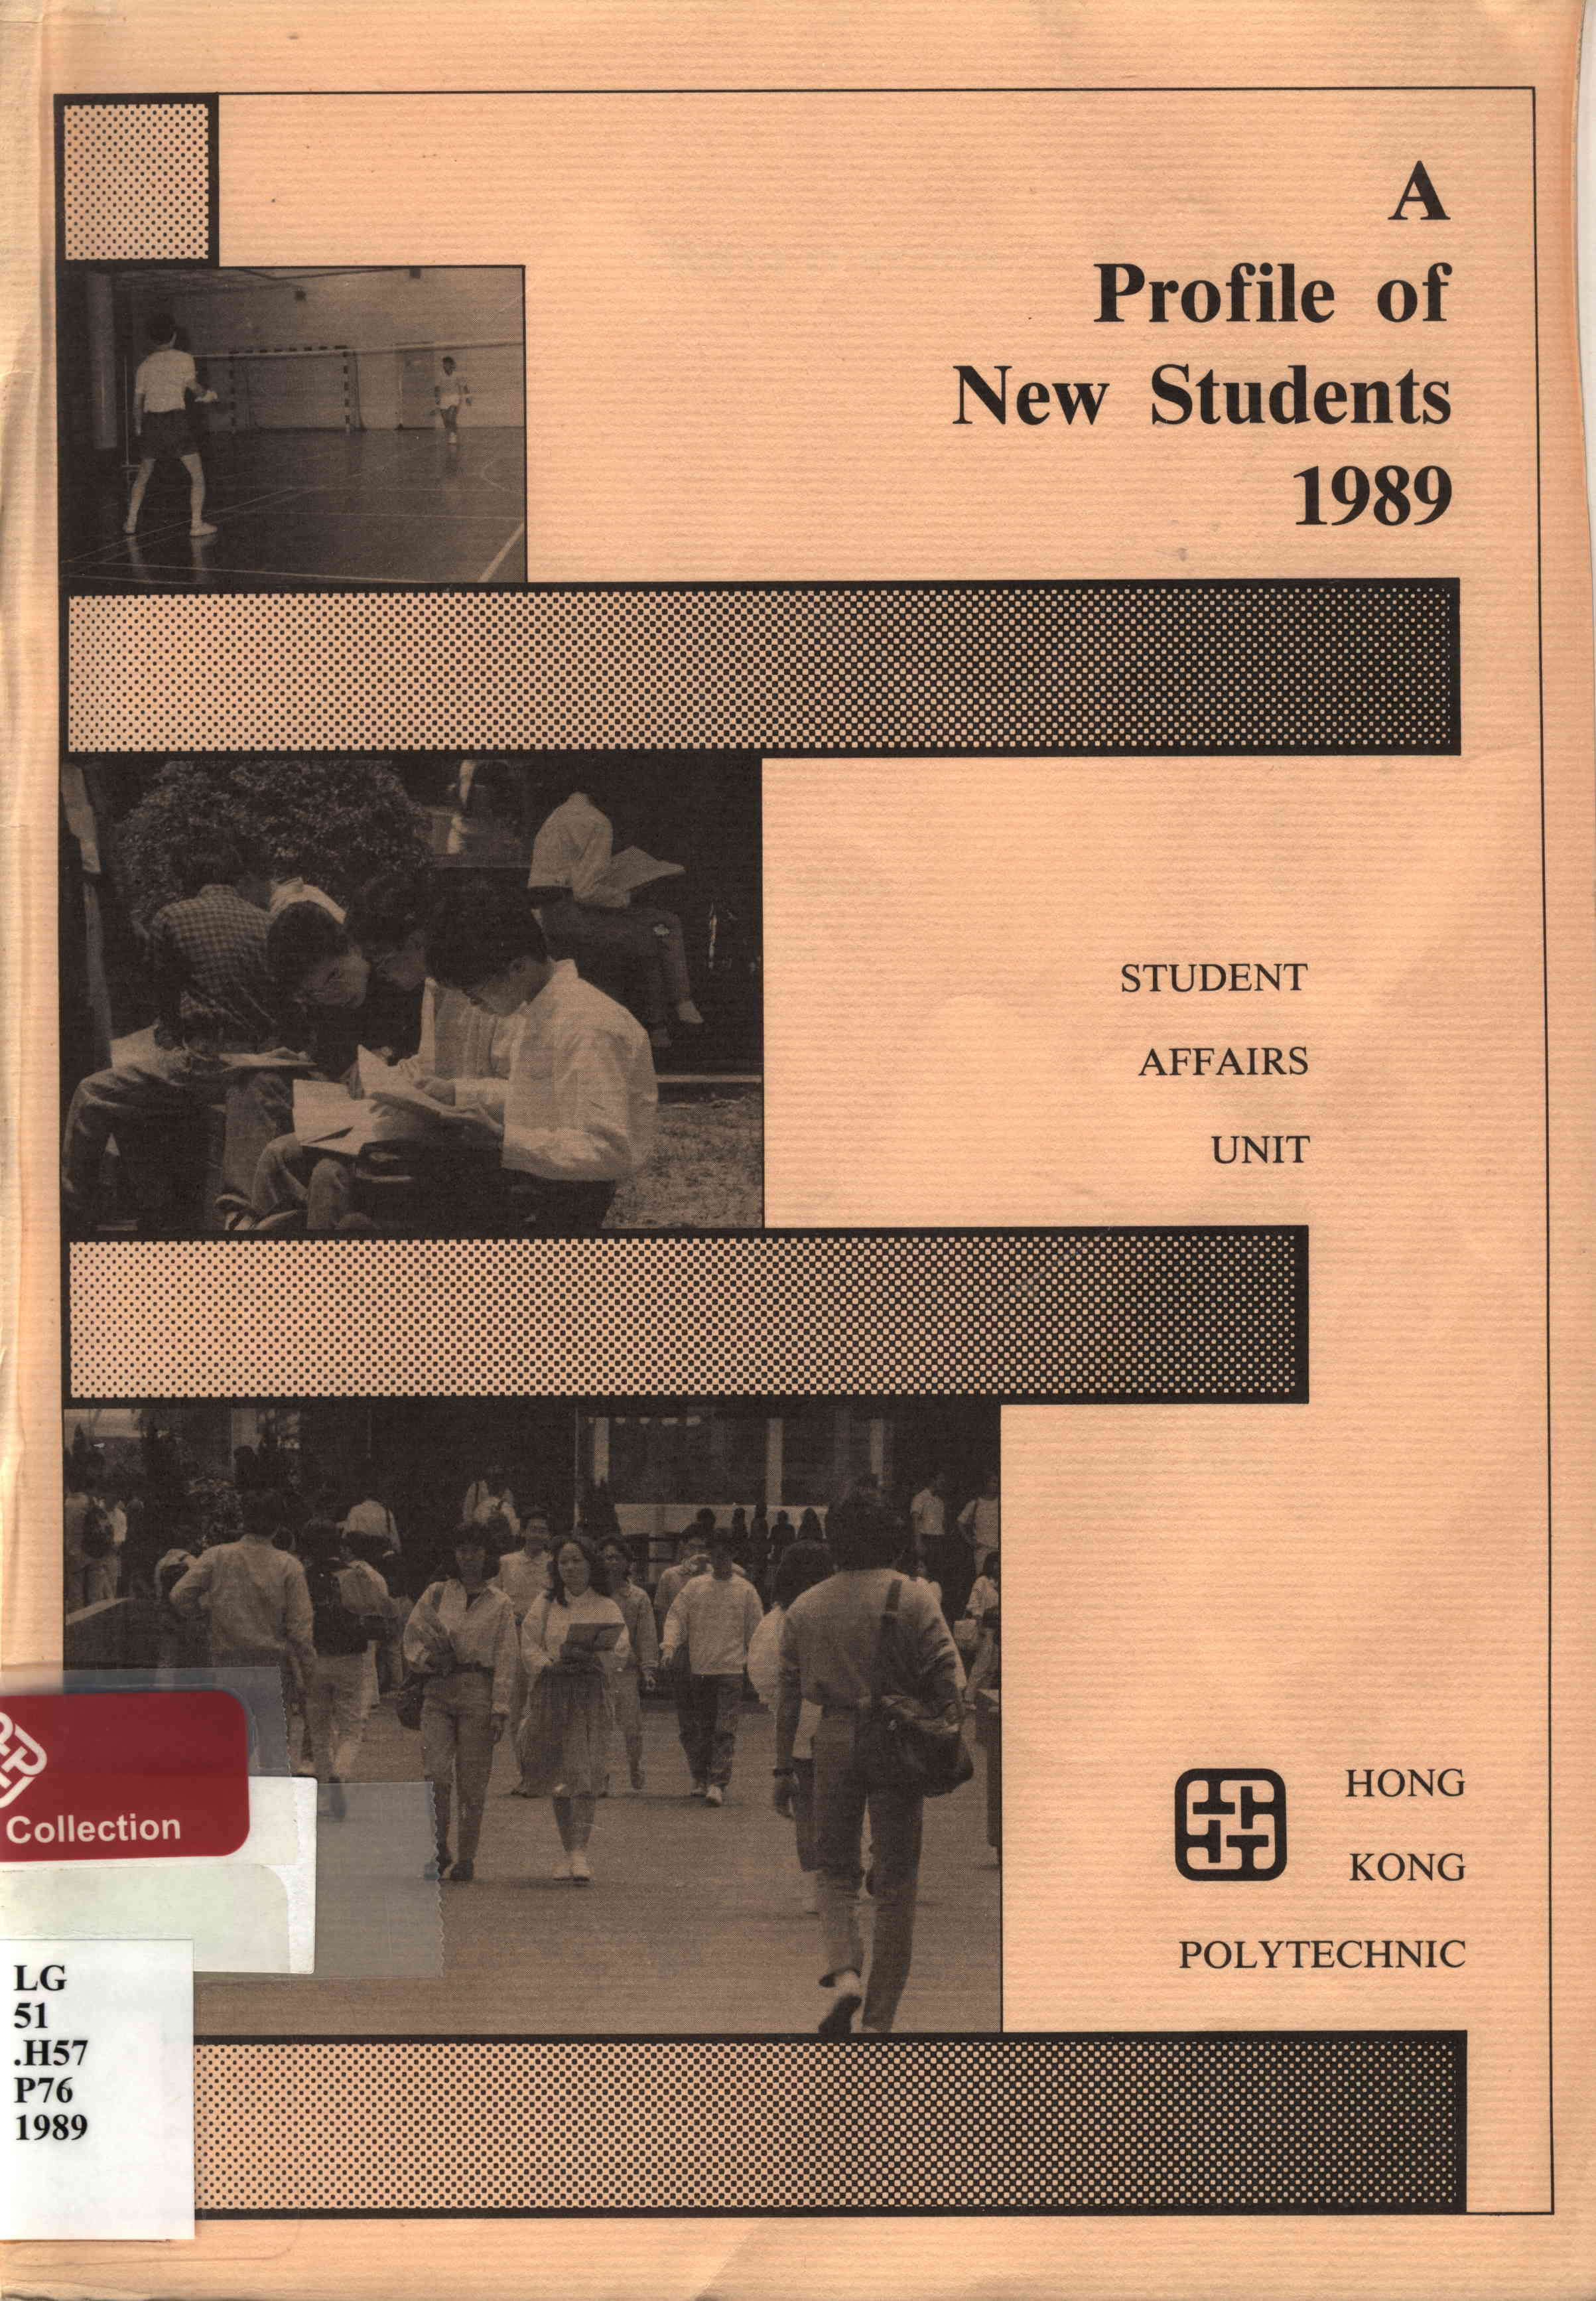 A Profile of new students 1989